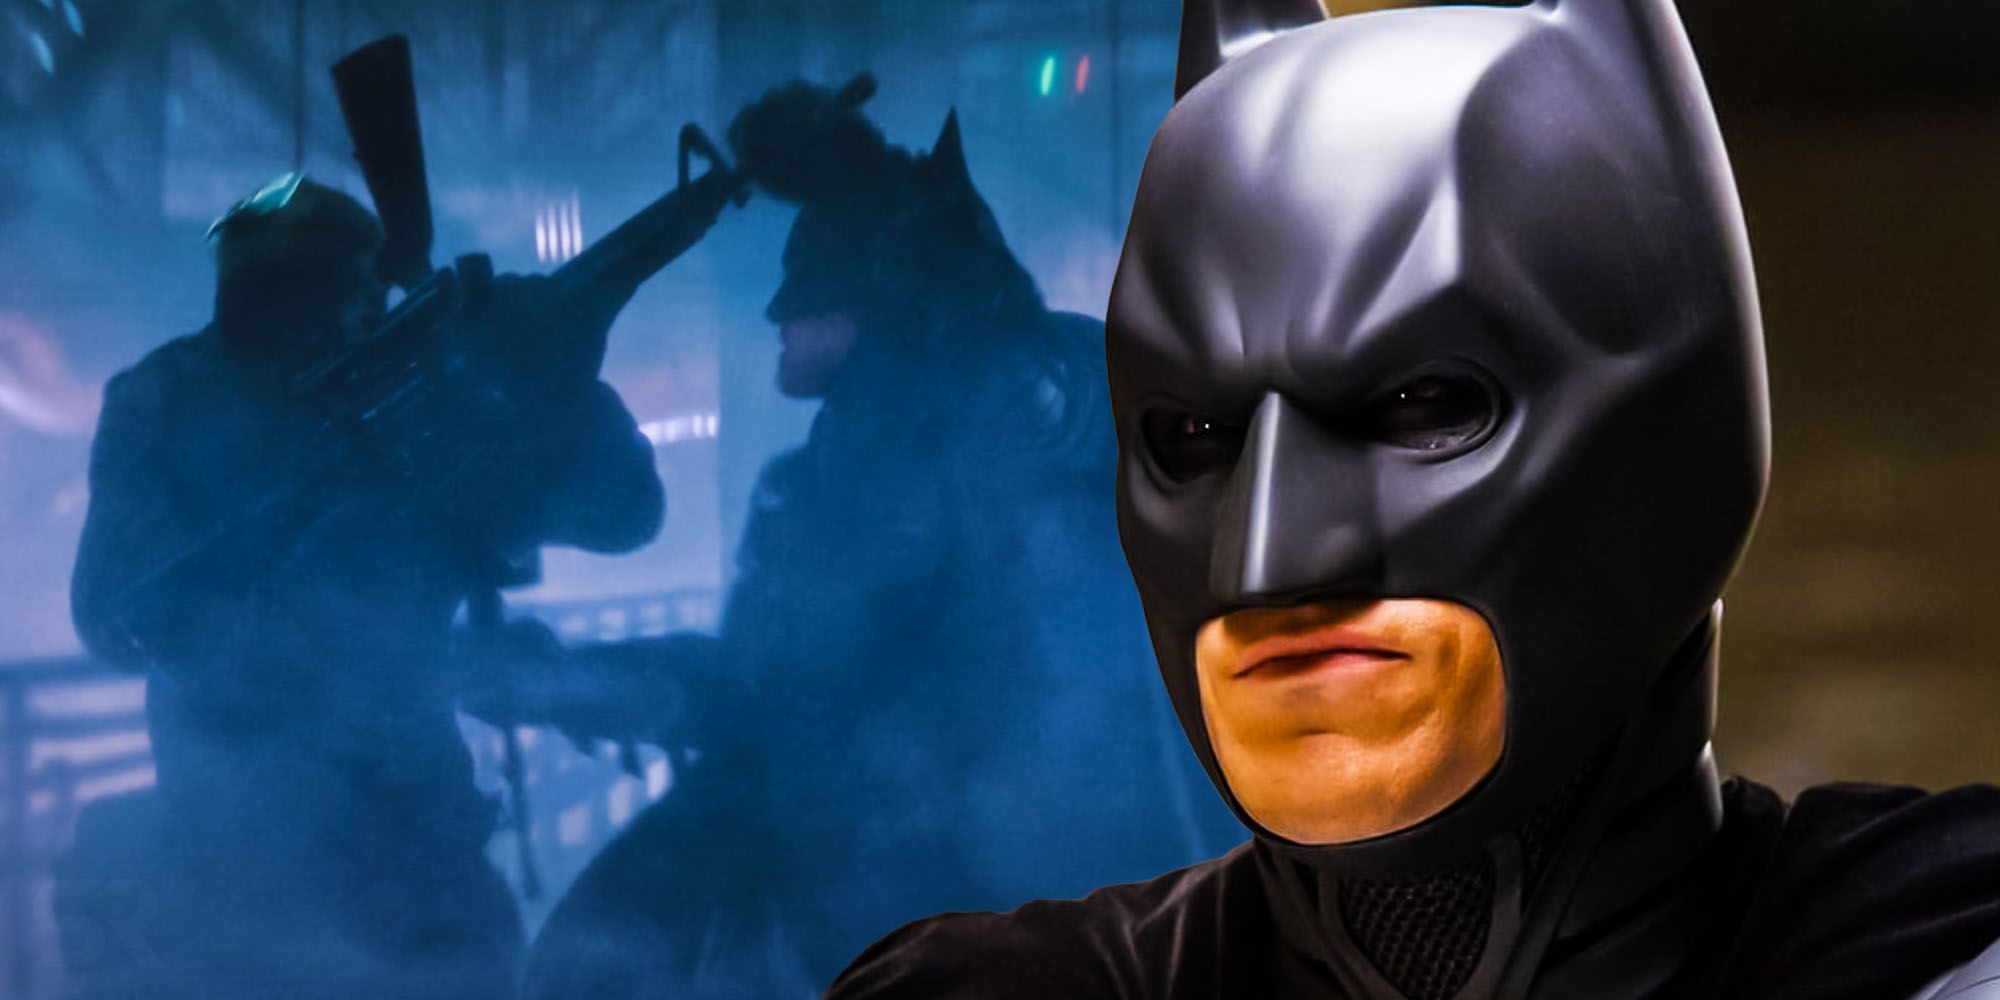 Pattinson's Batman Action Scenes Already Have A Clear Difference From Bale's